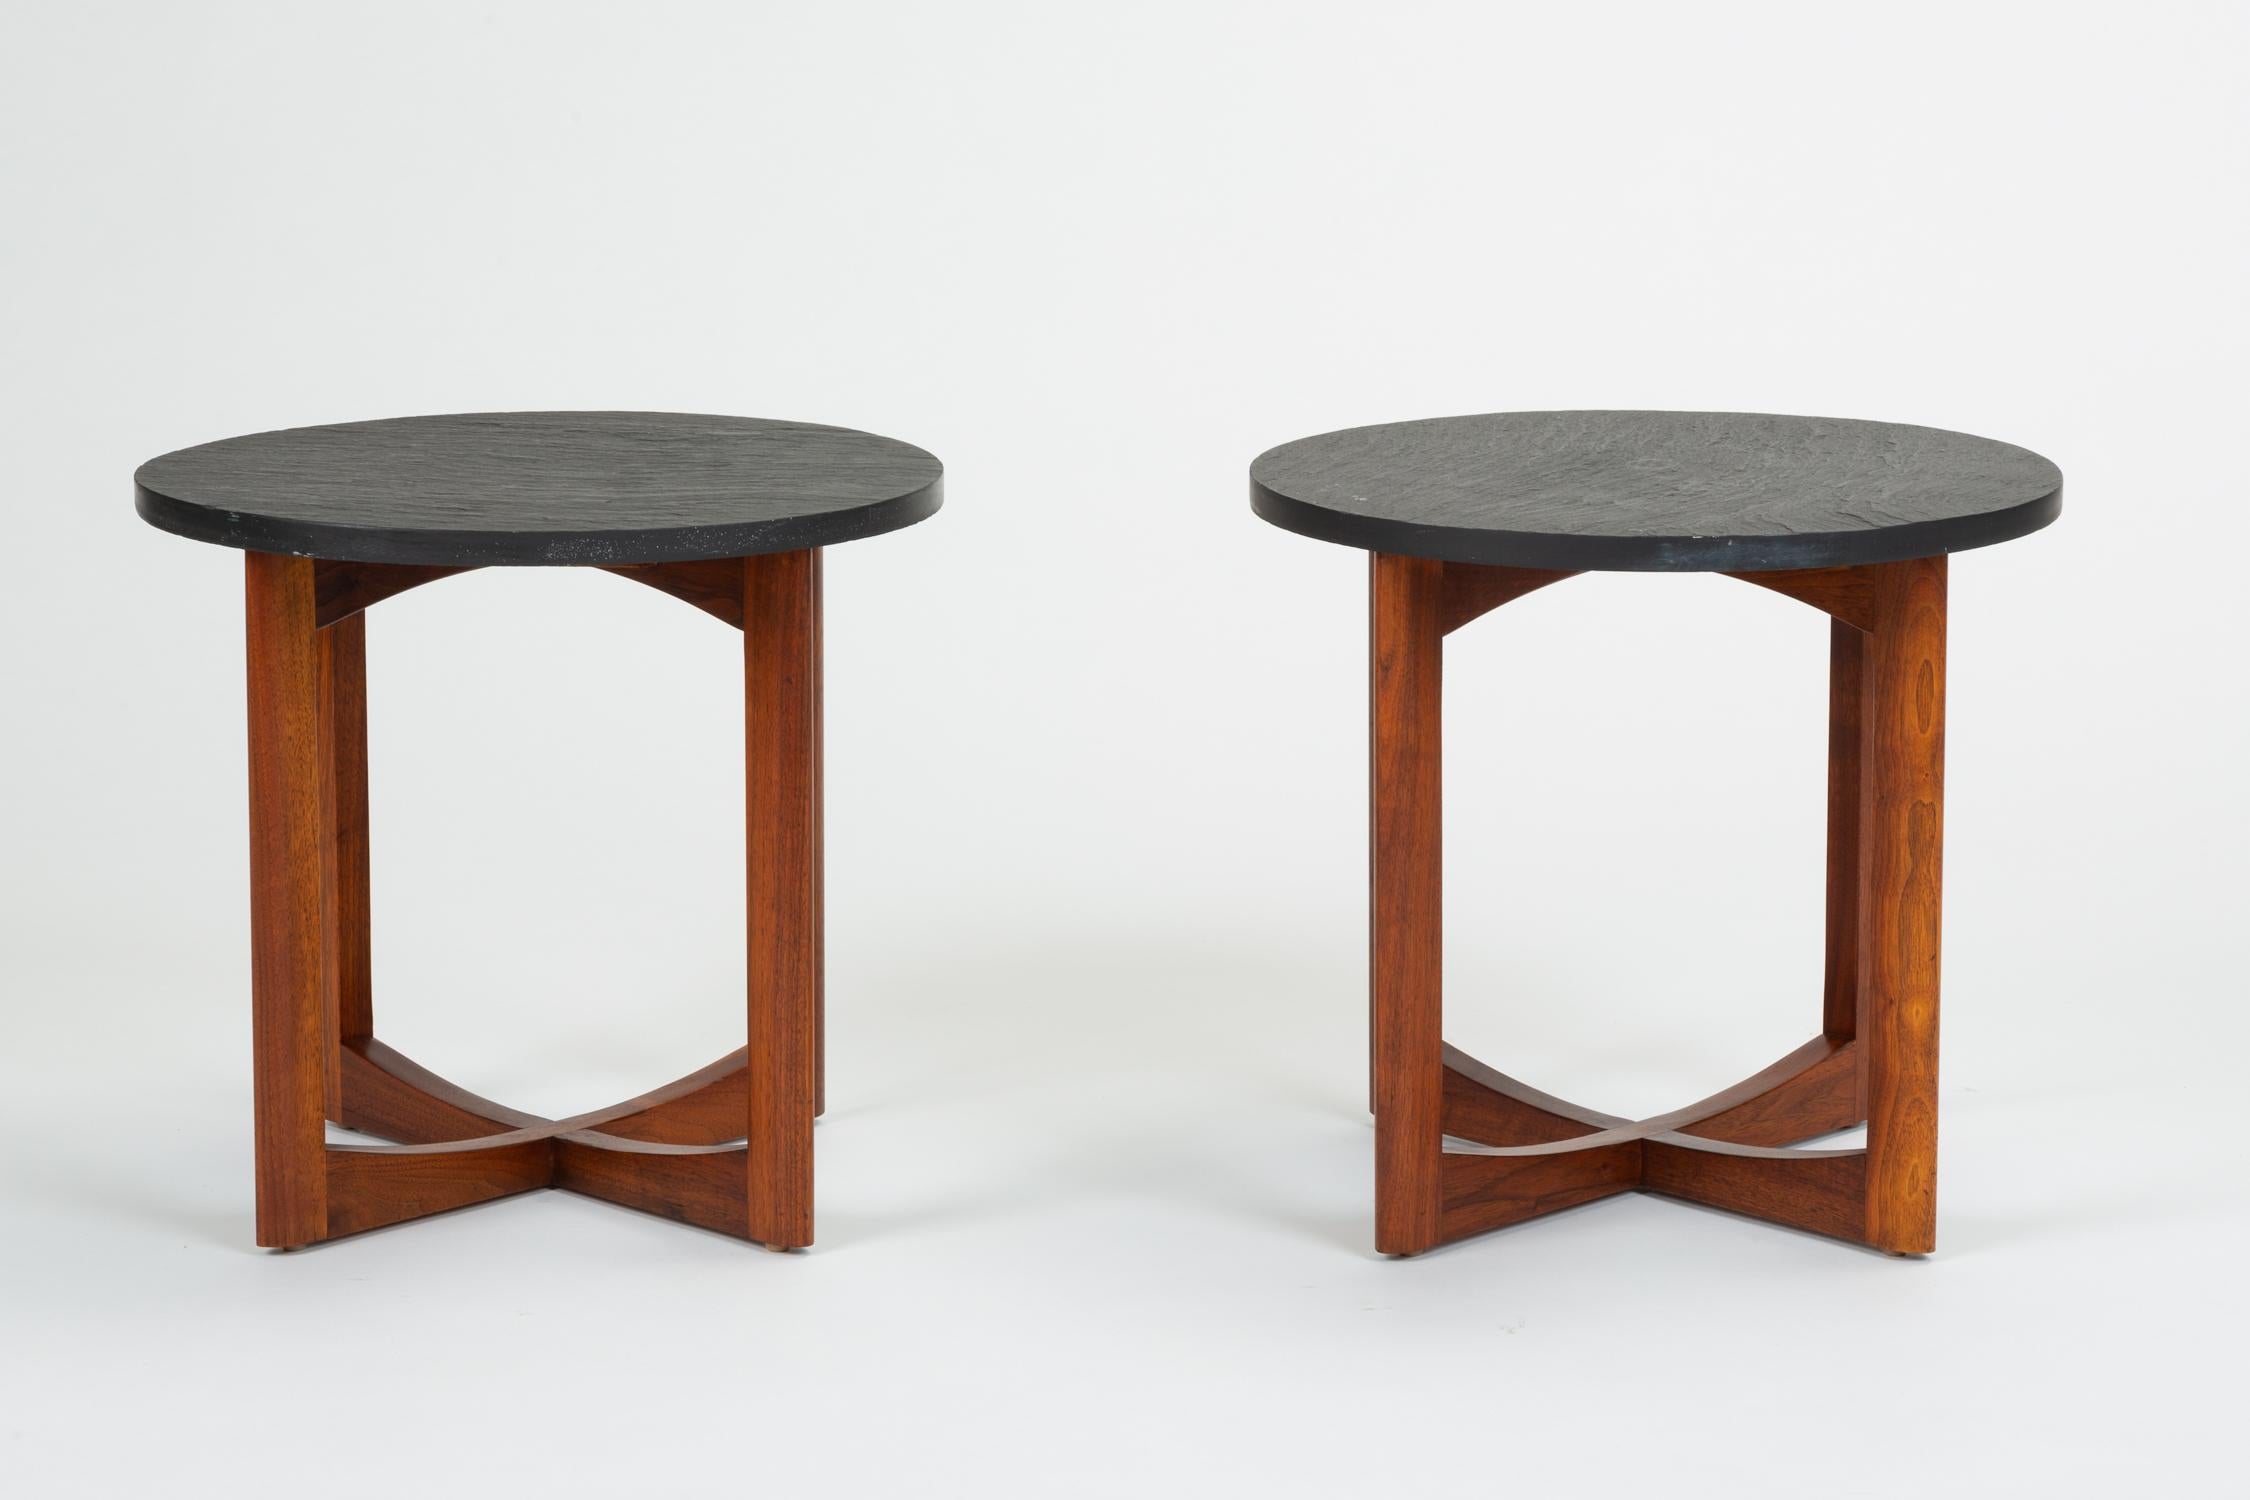 A pair of round, Mid-Century Modern side tables. Each table has a round top of textured slate sitting on four legs of solid, slightly tapered walnut. Solid walnut support beams sit on the ground in an X formation. Unsigned. 

Condition: Excellent